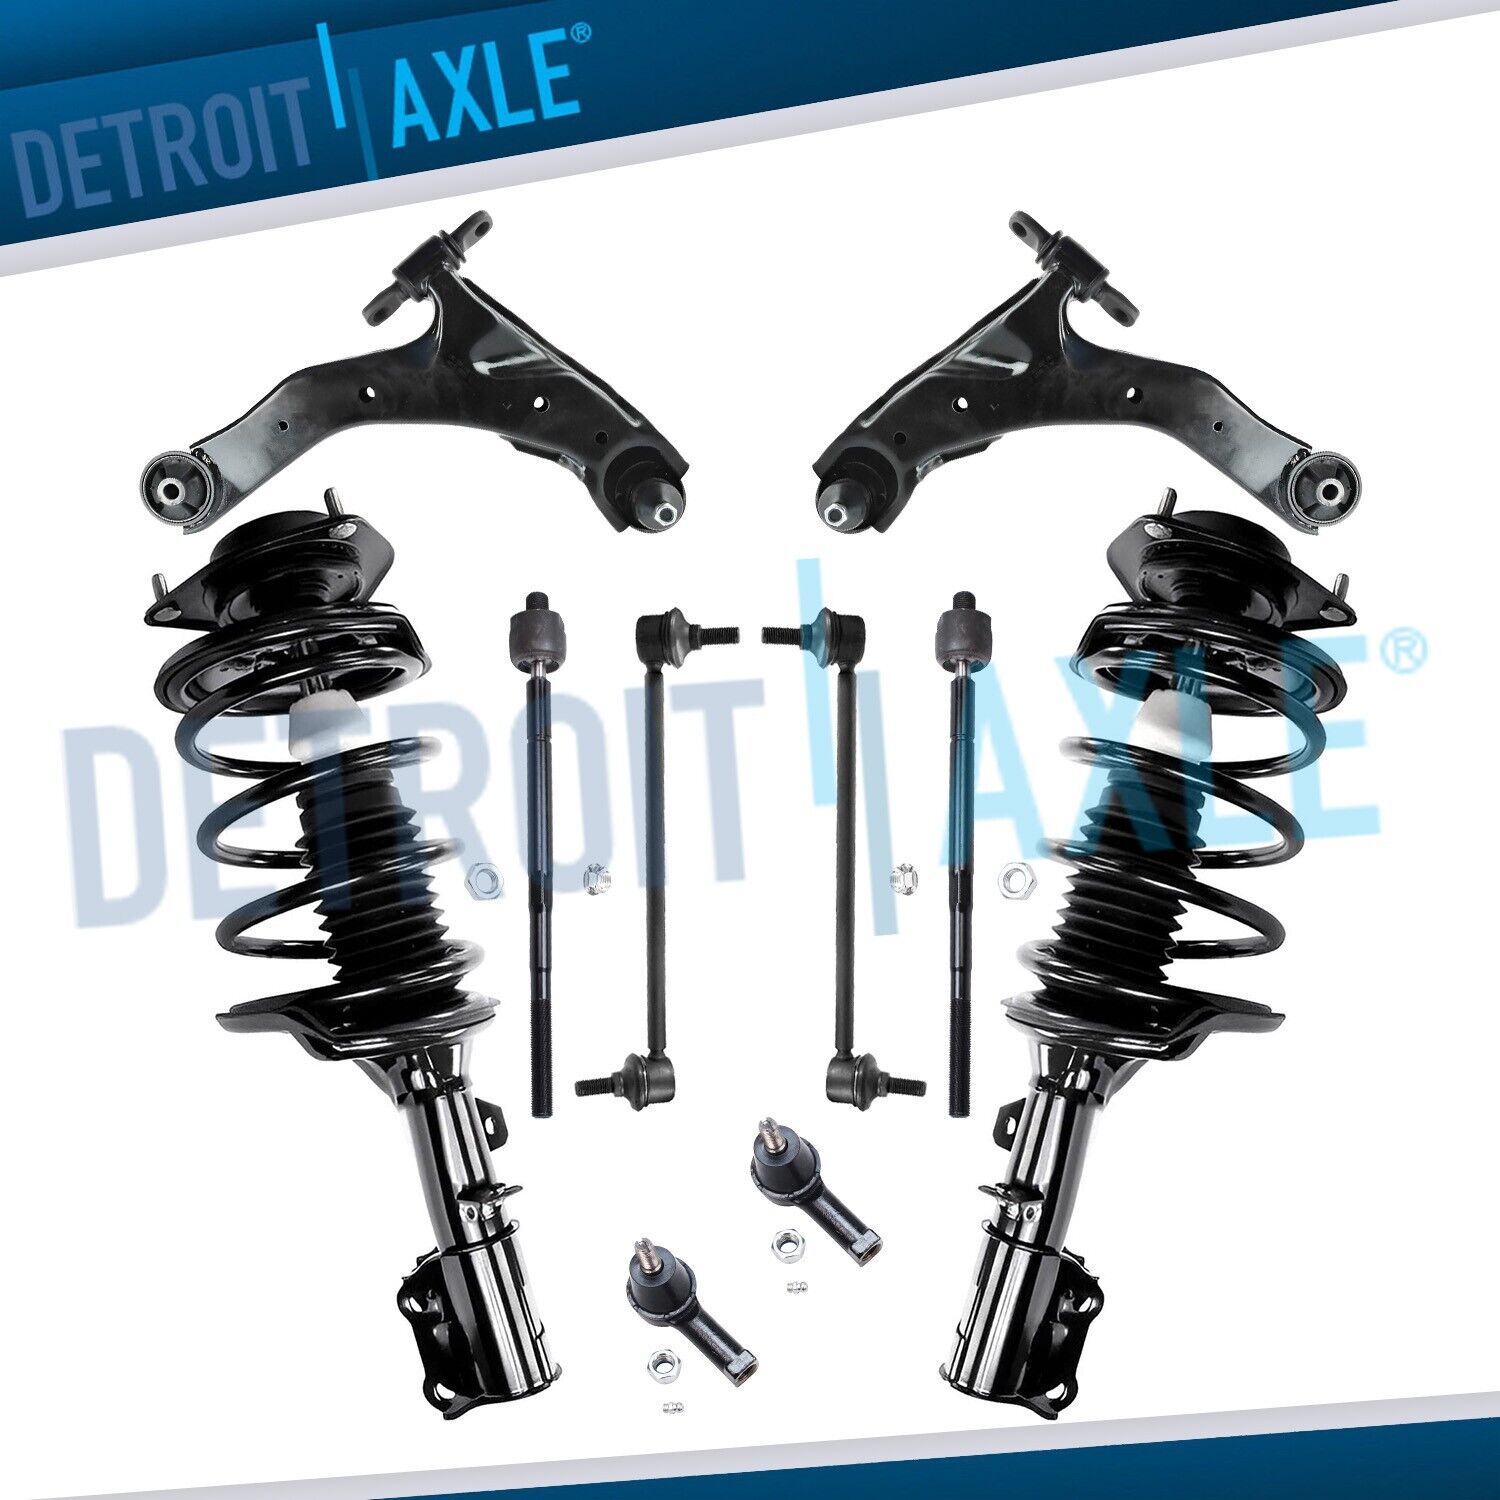 10pc Front Struts Control Arms Tie Rods Kit for 2005 - 2009 Kia Spectra Spectra5